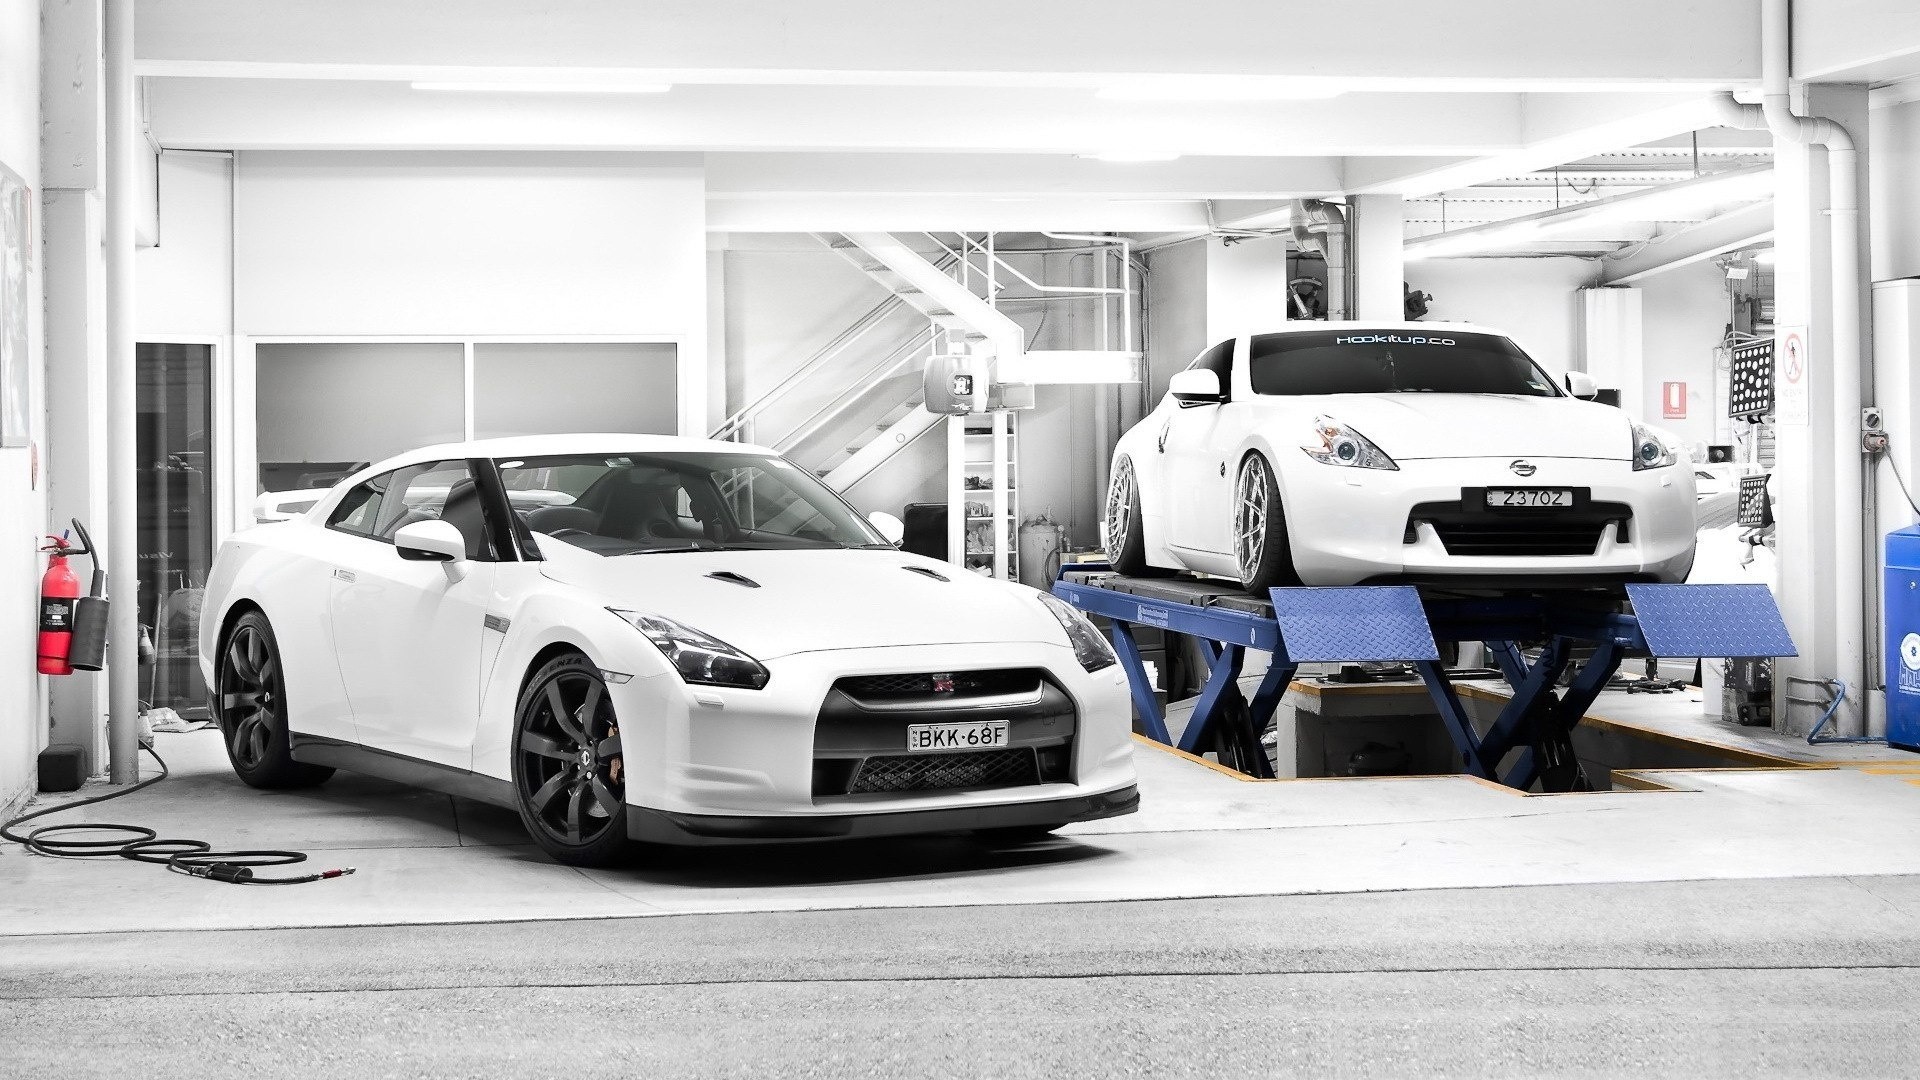 Nissan GT R Nissan 370Z Car Nissan Fairlady Z Nissan Sports Car Supercars Front Angle View Garages W 1920x1080